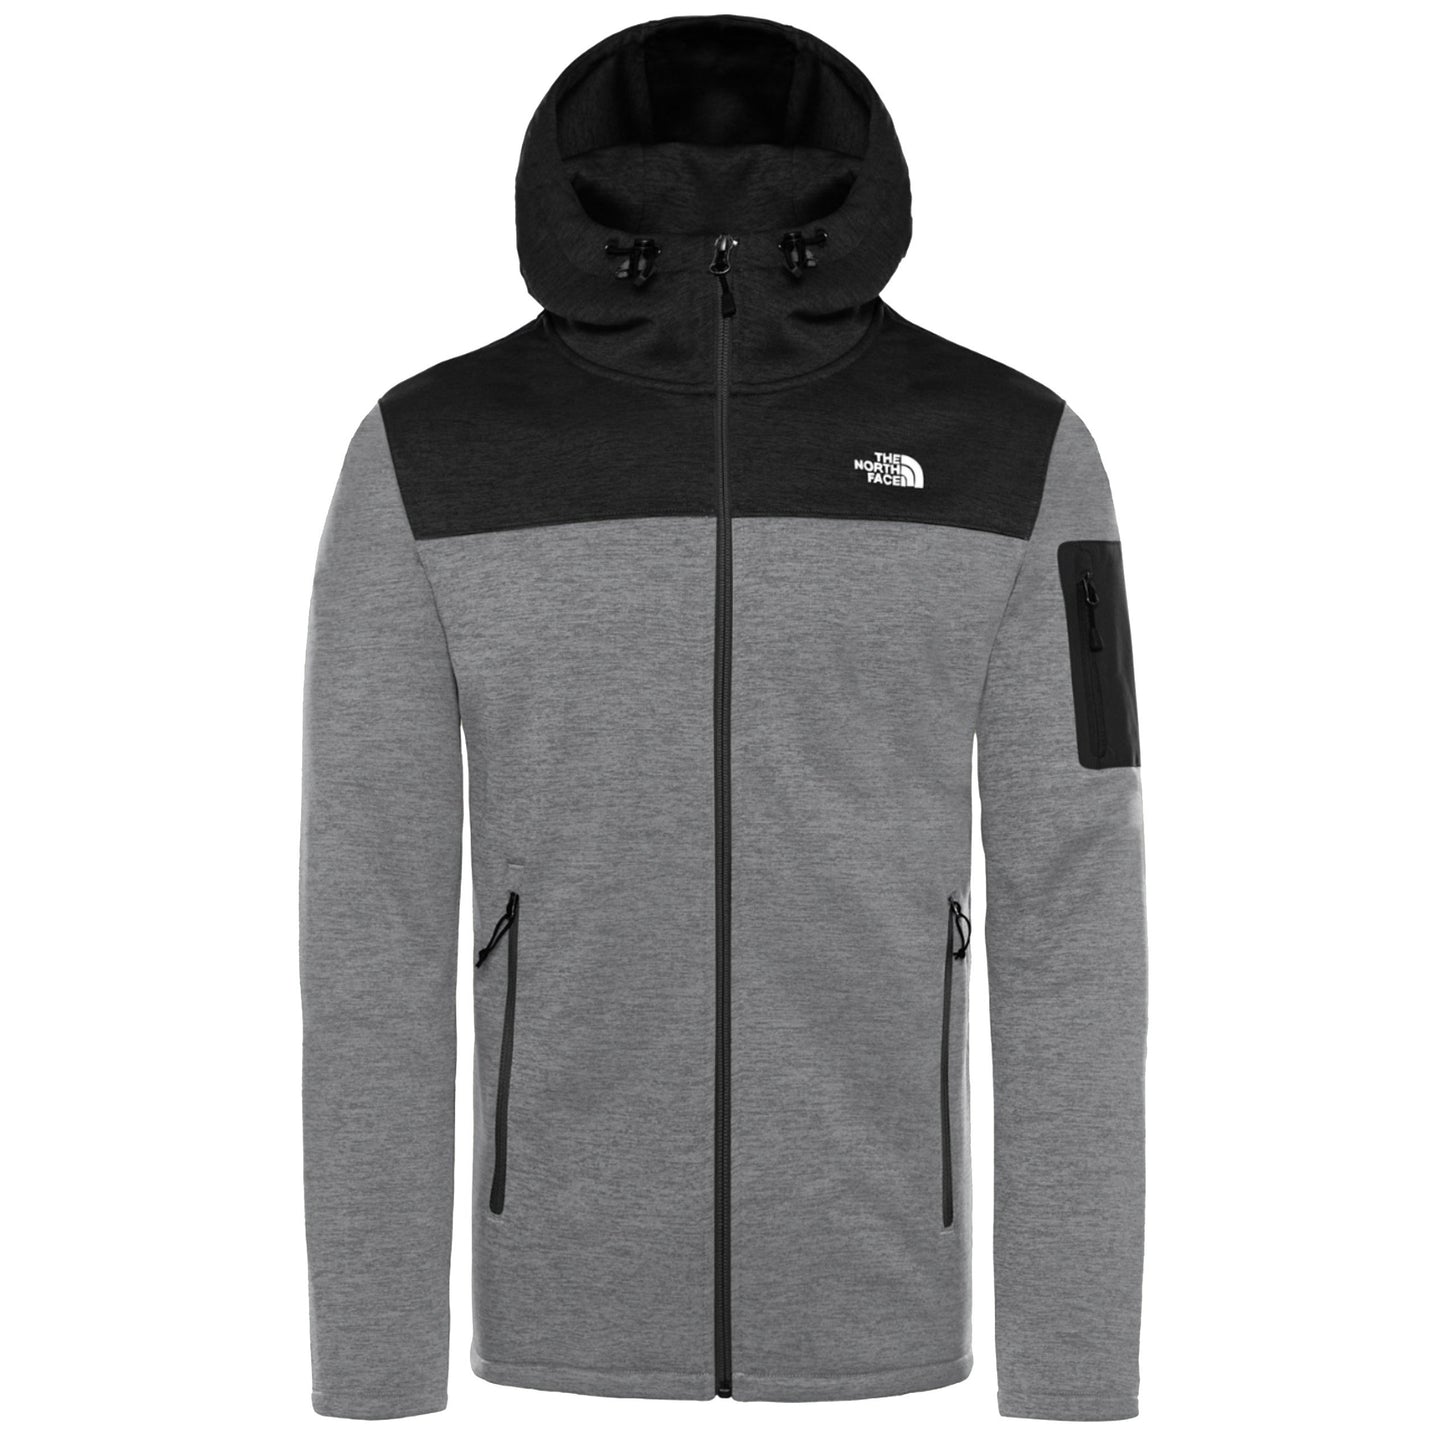 The North Face Tech Hooded Jacket Coat The North Face 